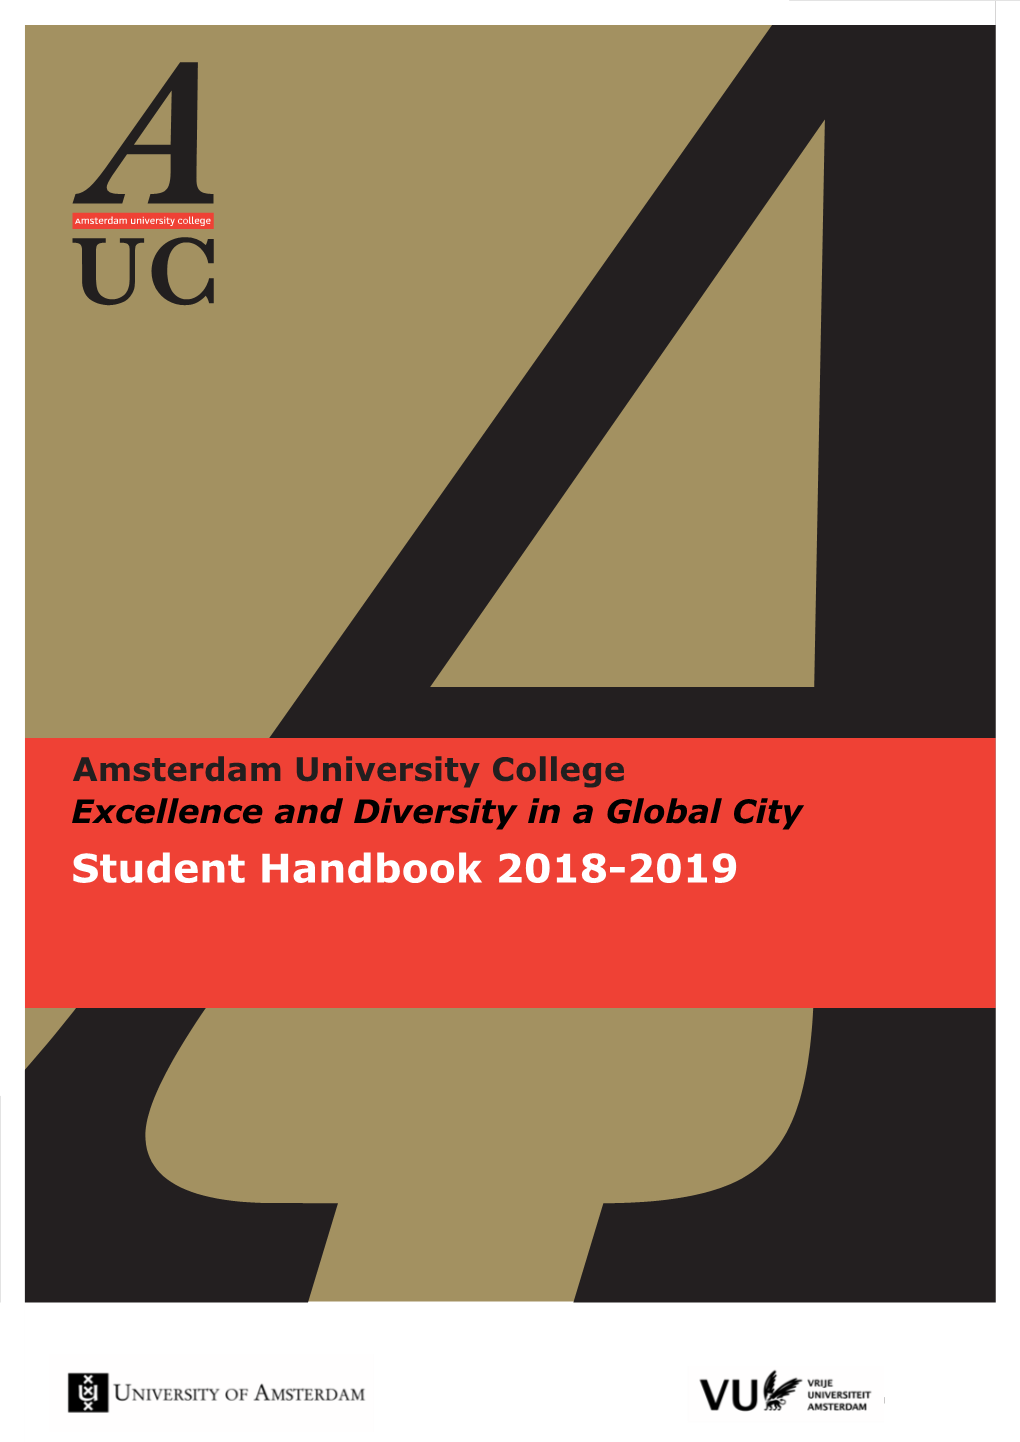 Amsterdam University College Excellence and Diversity in a Global City Student Handbook 2018-2019